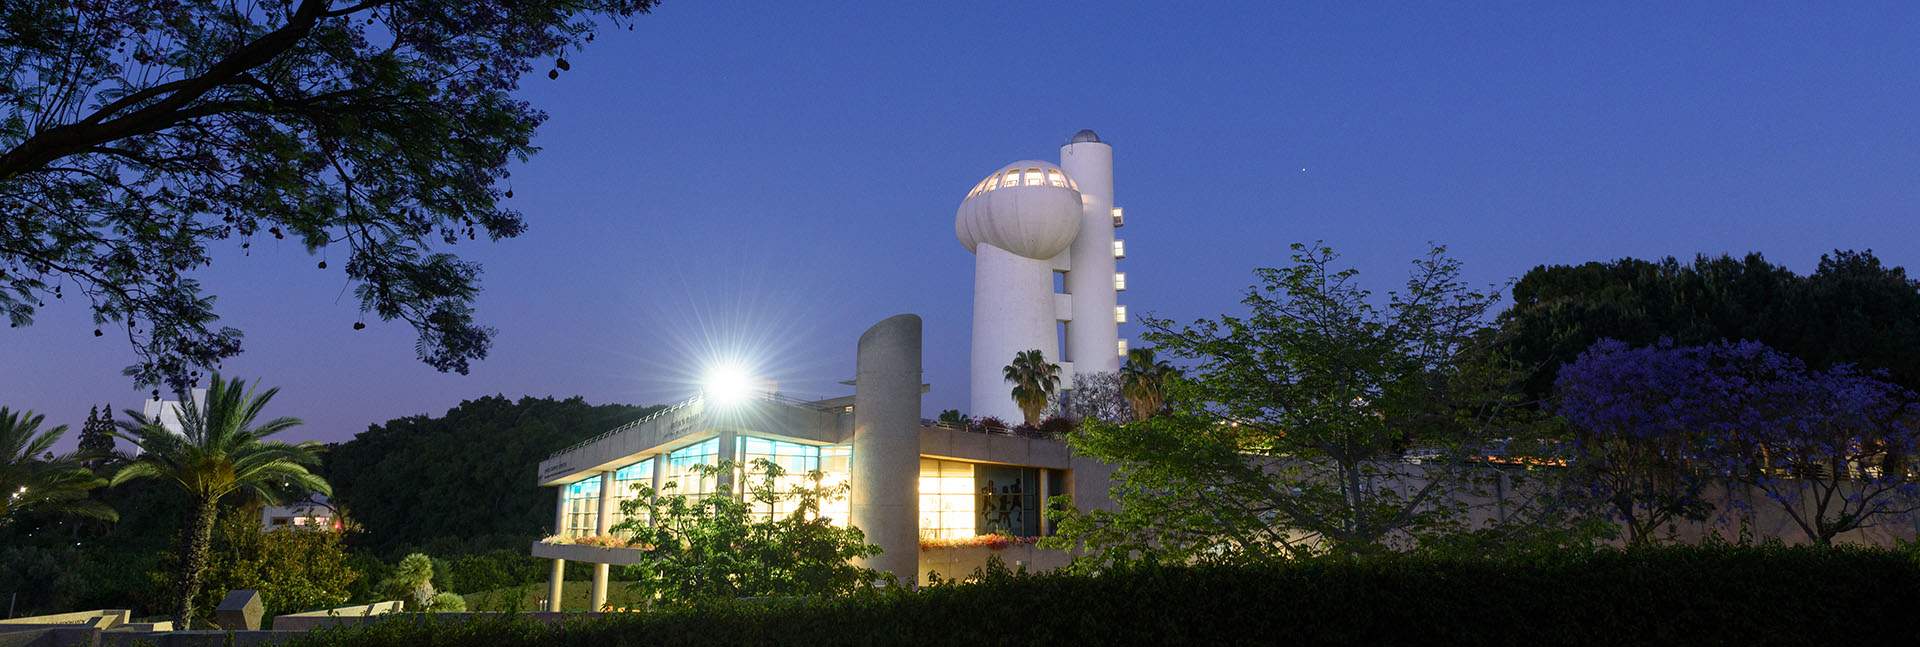 Koffler Accelerator of the Canada Centre of Nuclear Physics, The Weizmann Institute of Science